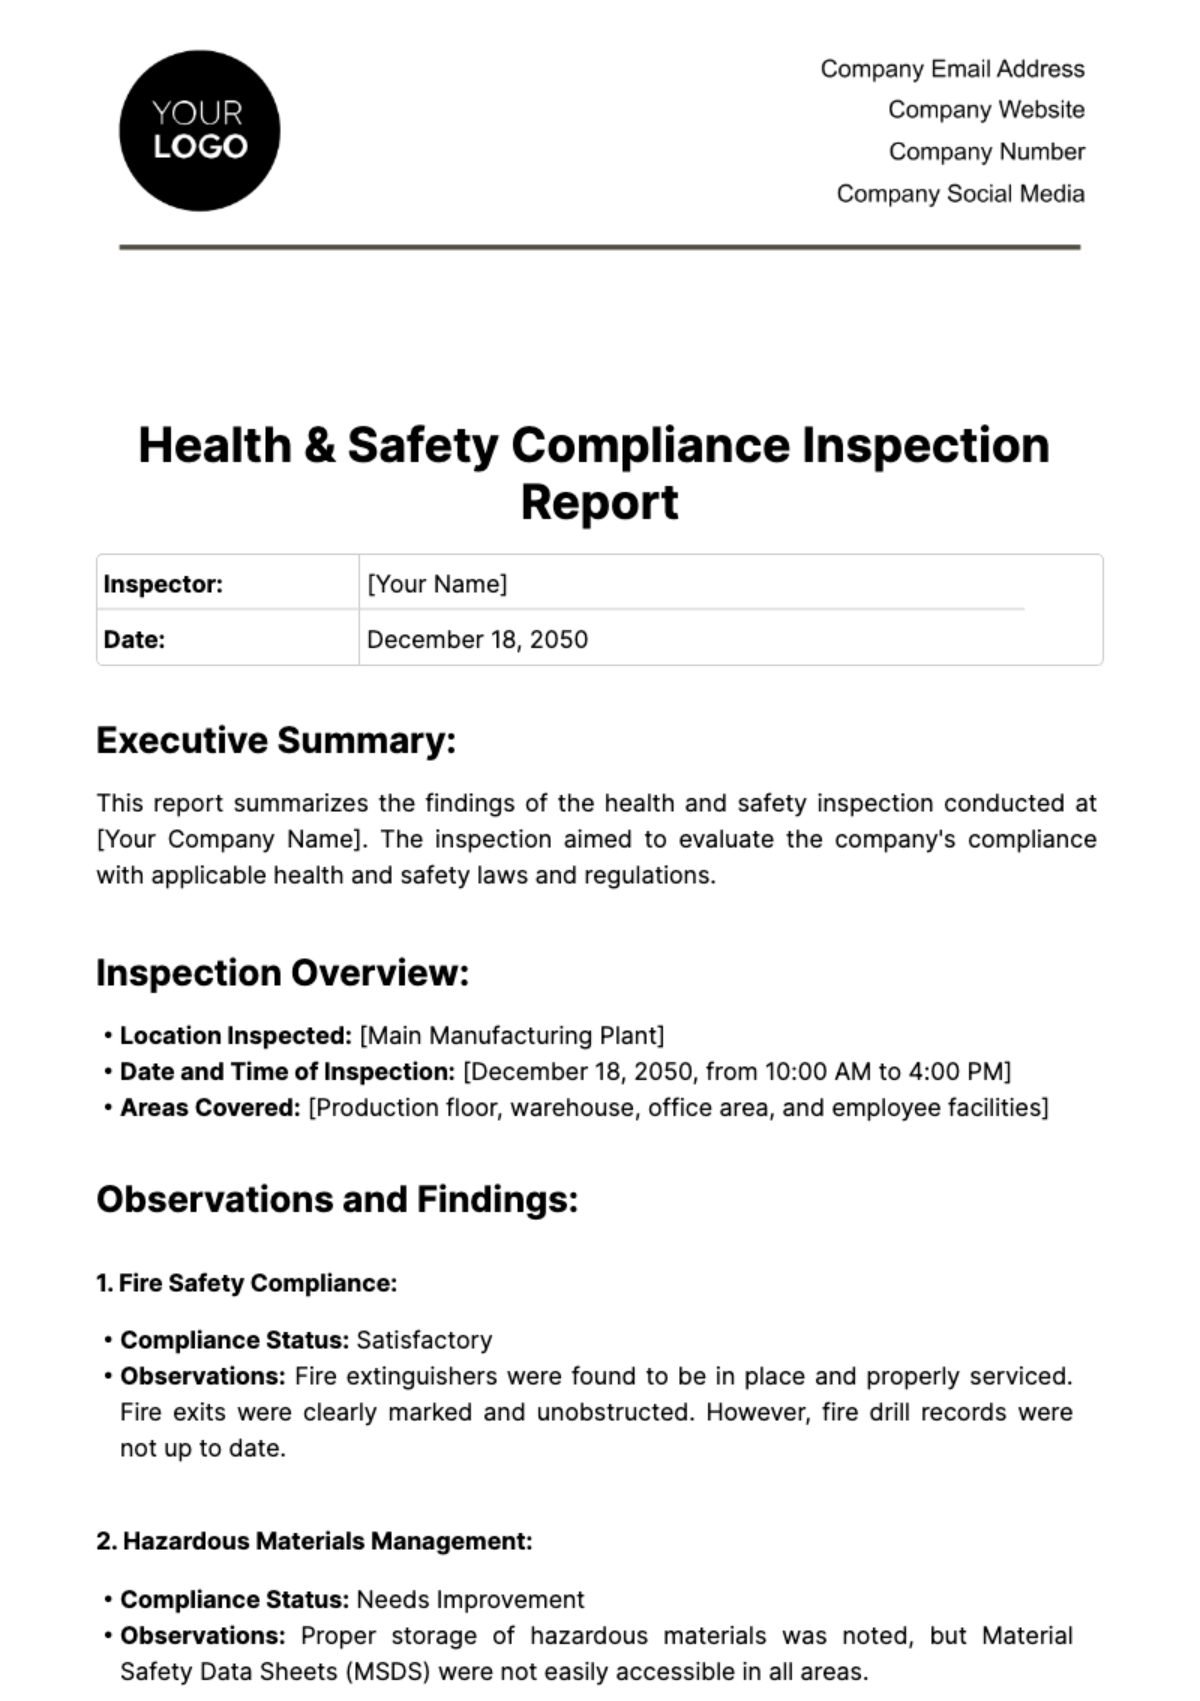 Free Health & Safety Compliance Inspection Report Template